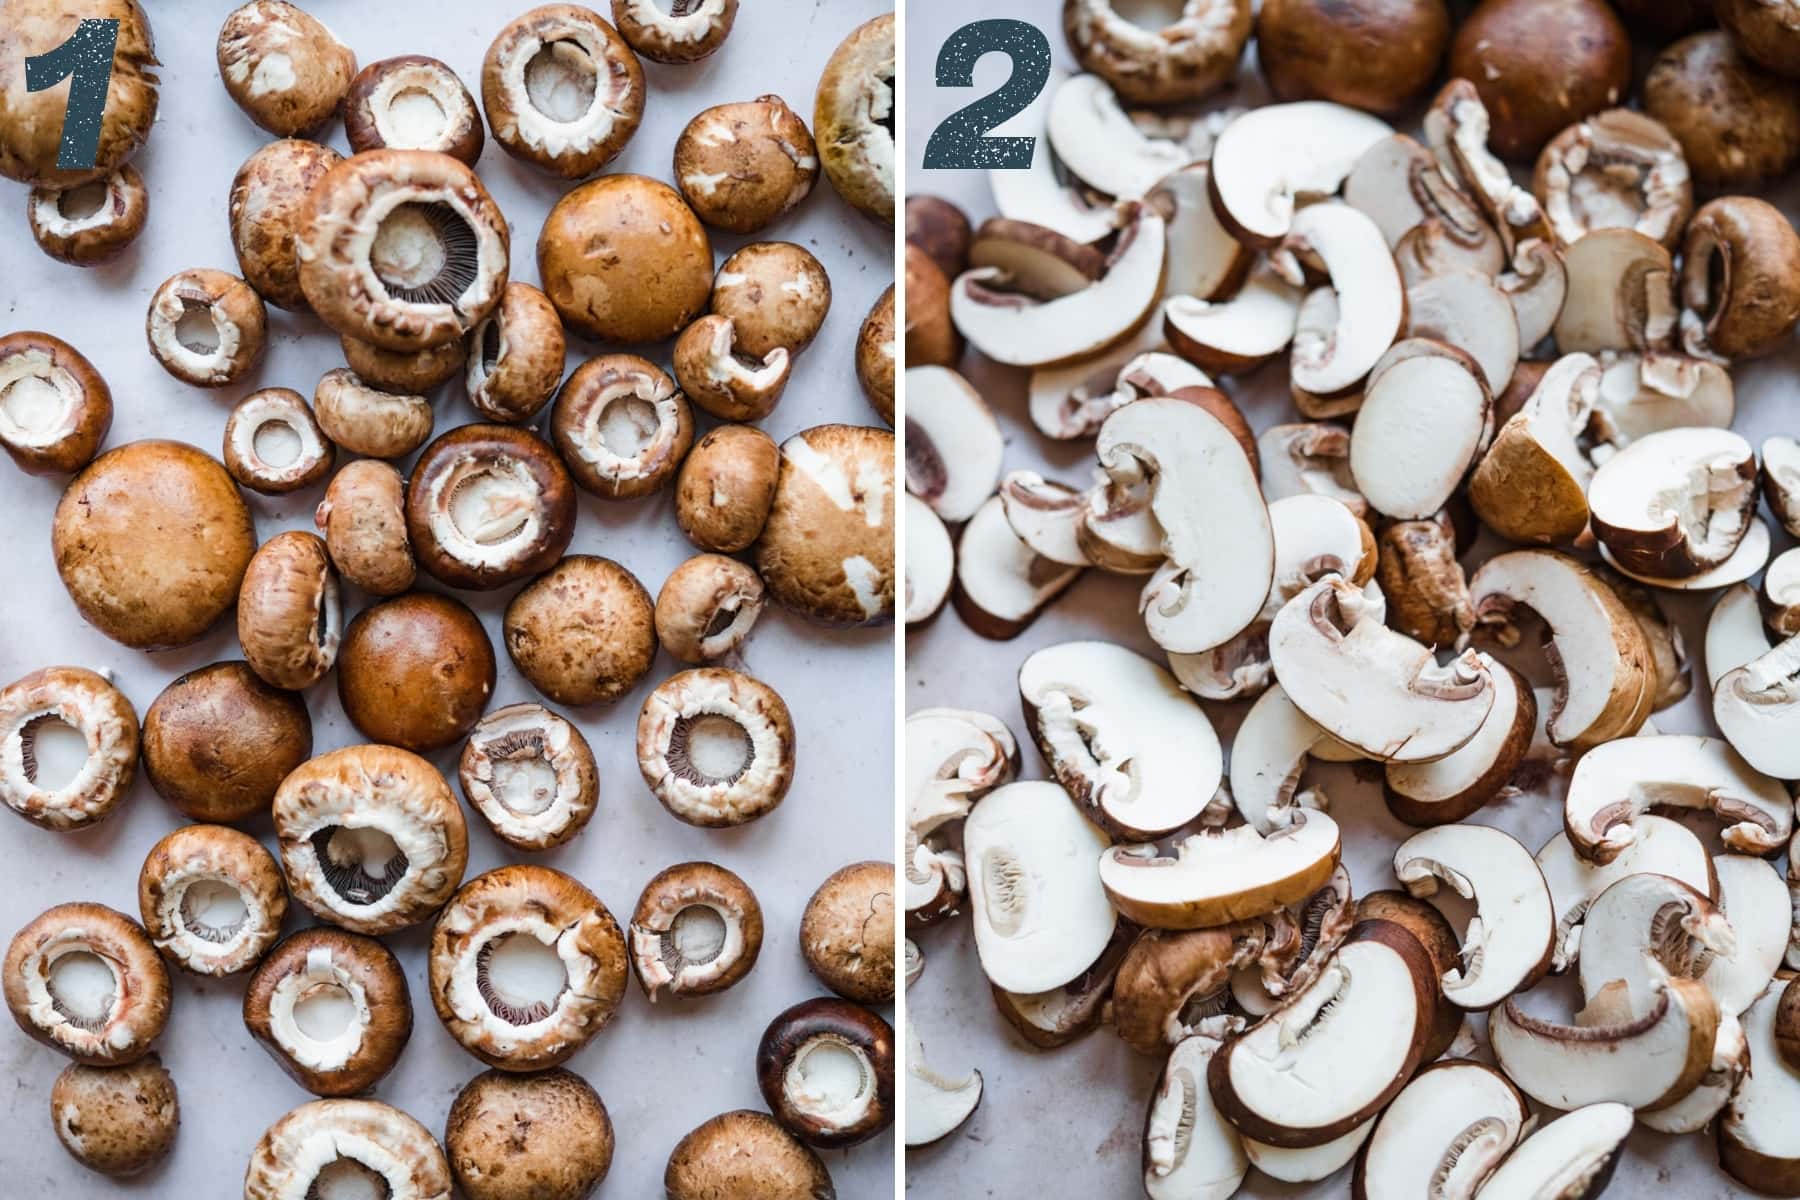 Cremini mushrooms before and after slicing. 